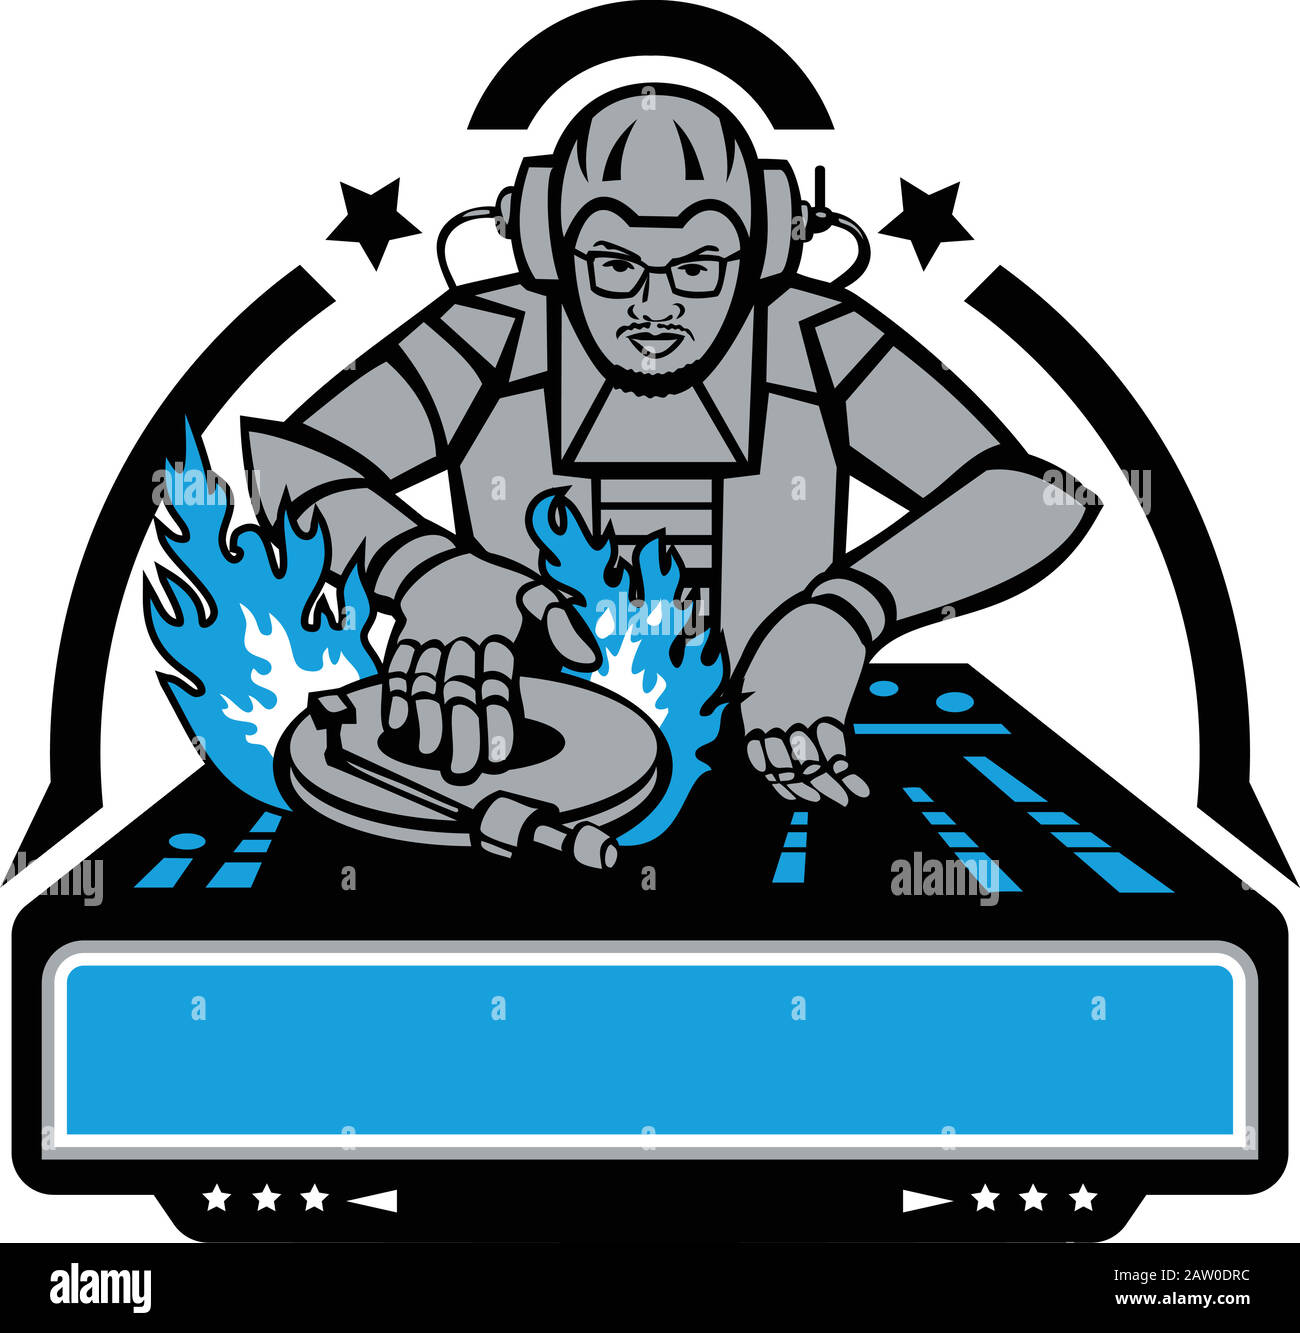 Mascot icon illustration of a futuristic African American disc jockey, dj ordeejay scratching turntable on fire  viewed from front on isolated backgro Stock Vector